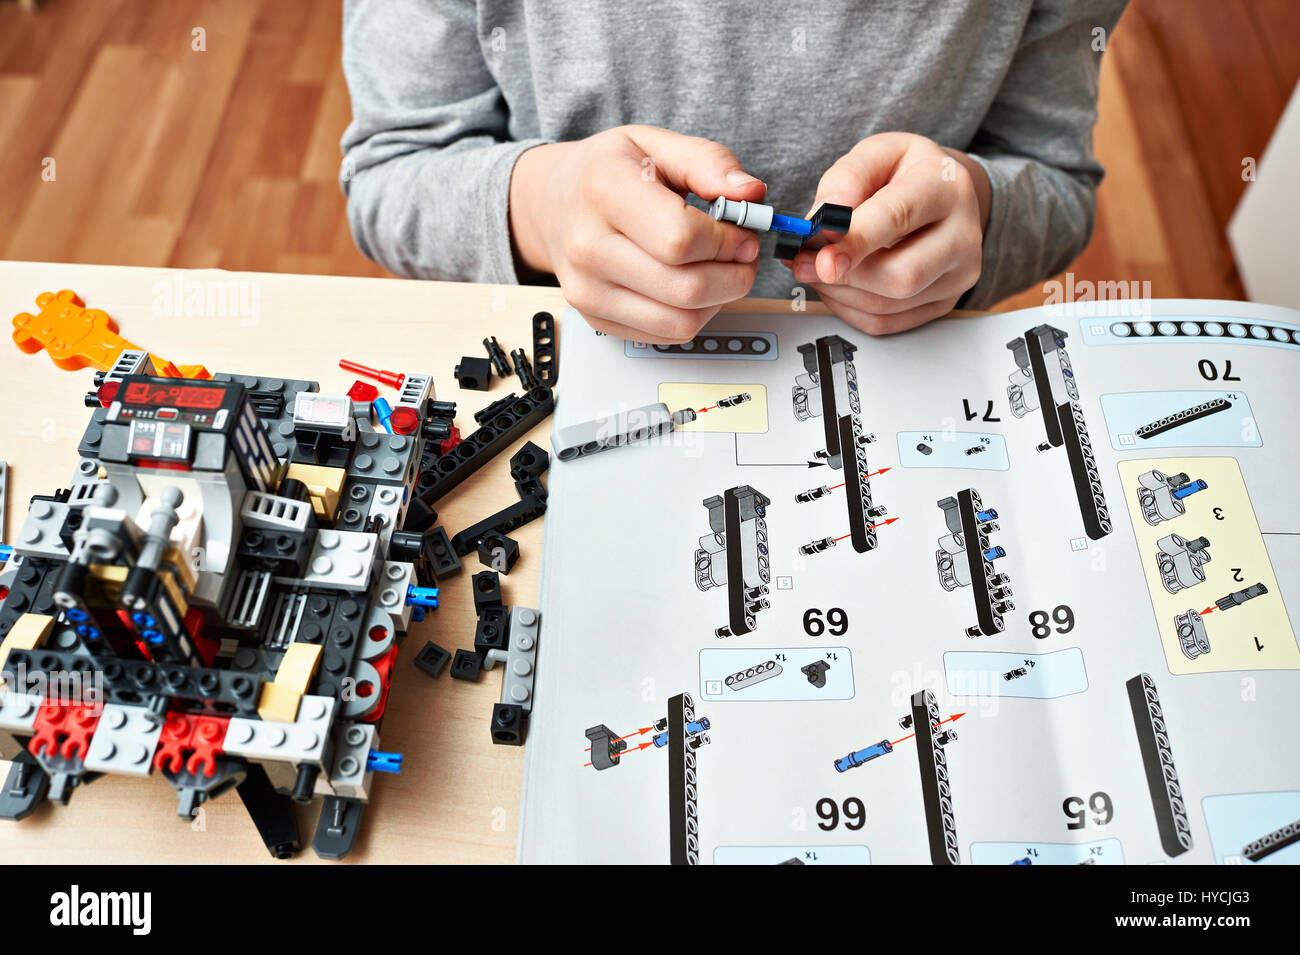 Boy collects the children's plastic construction toys Stock Photo